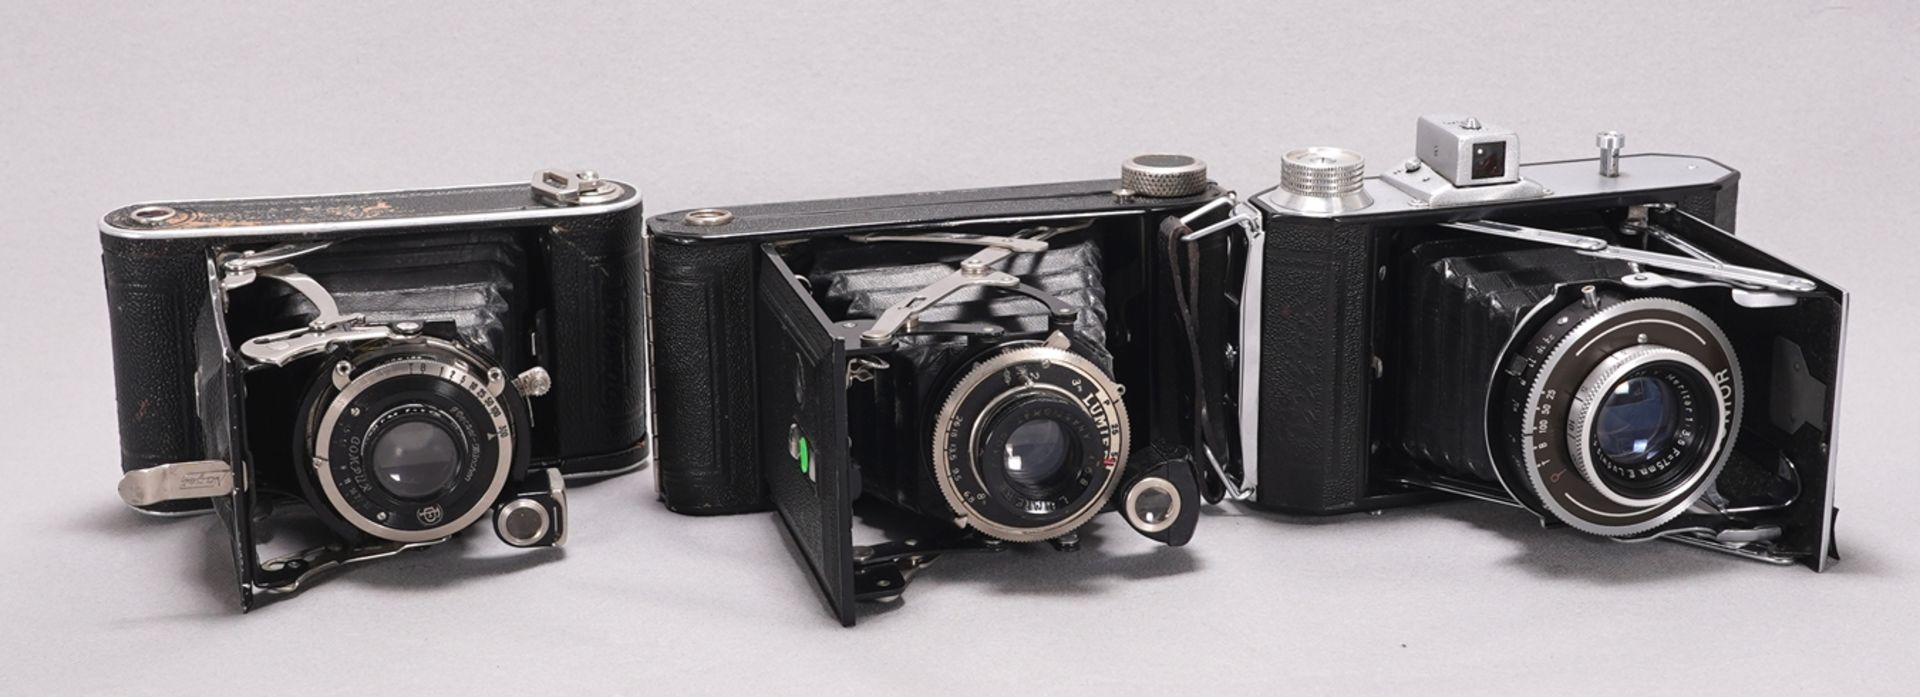 Collection of folding cameras - Image 3 of 6